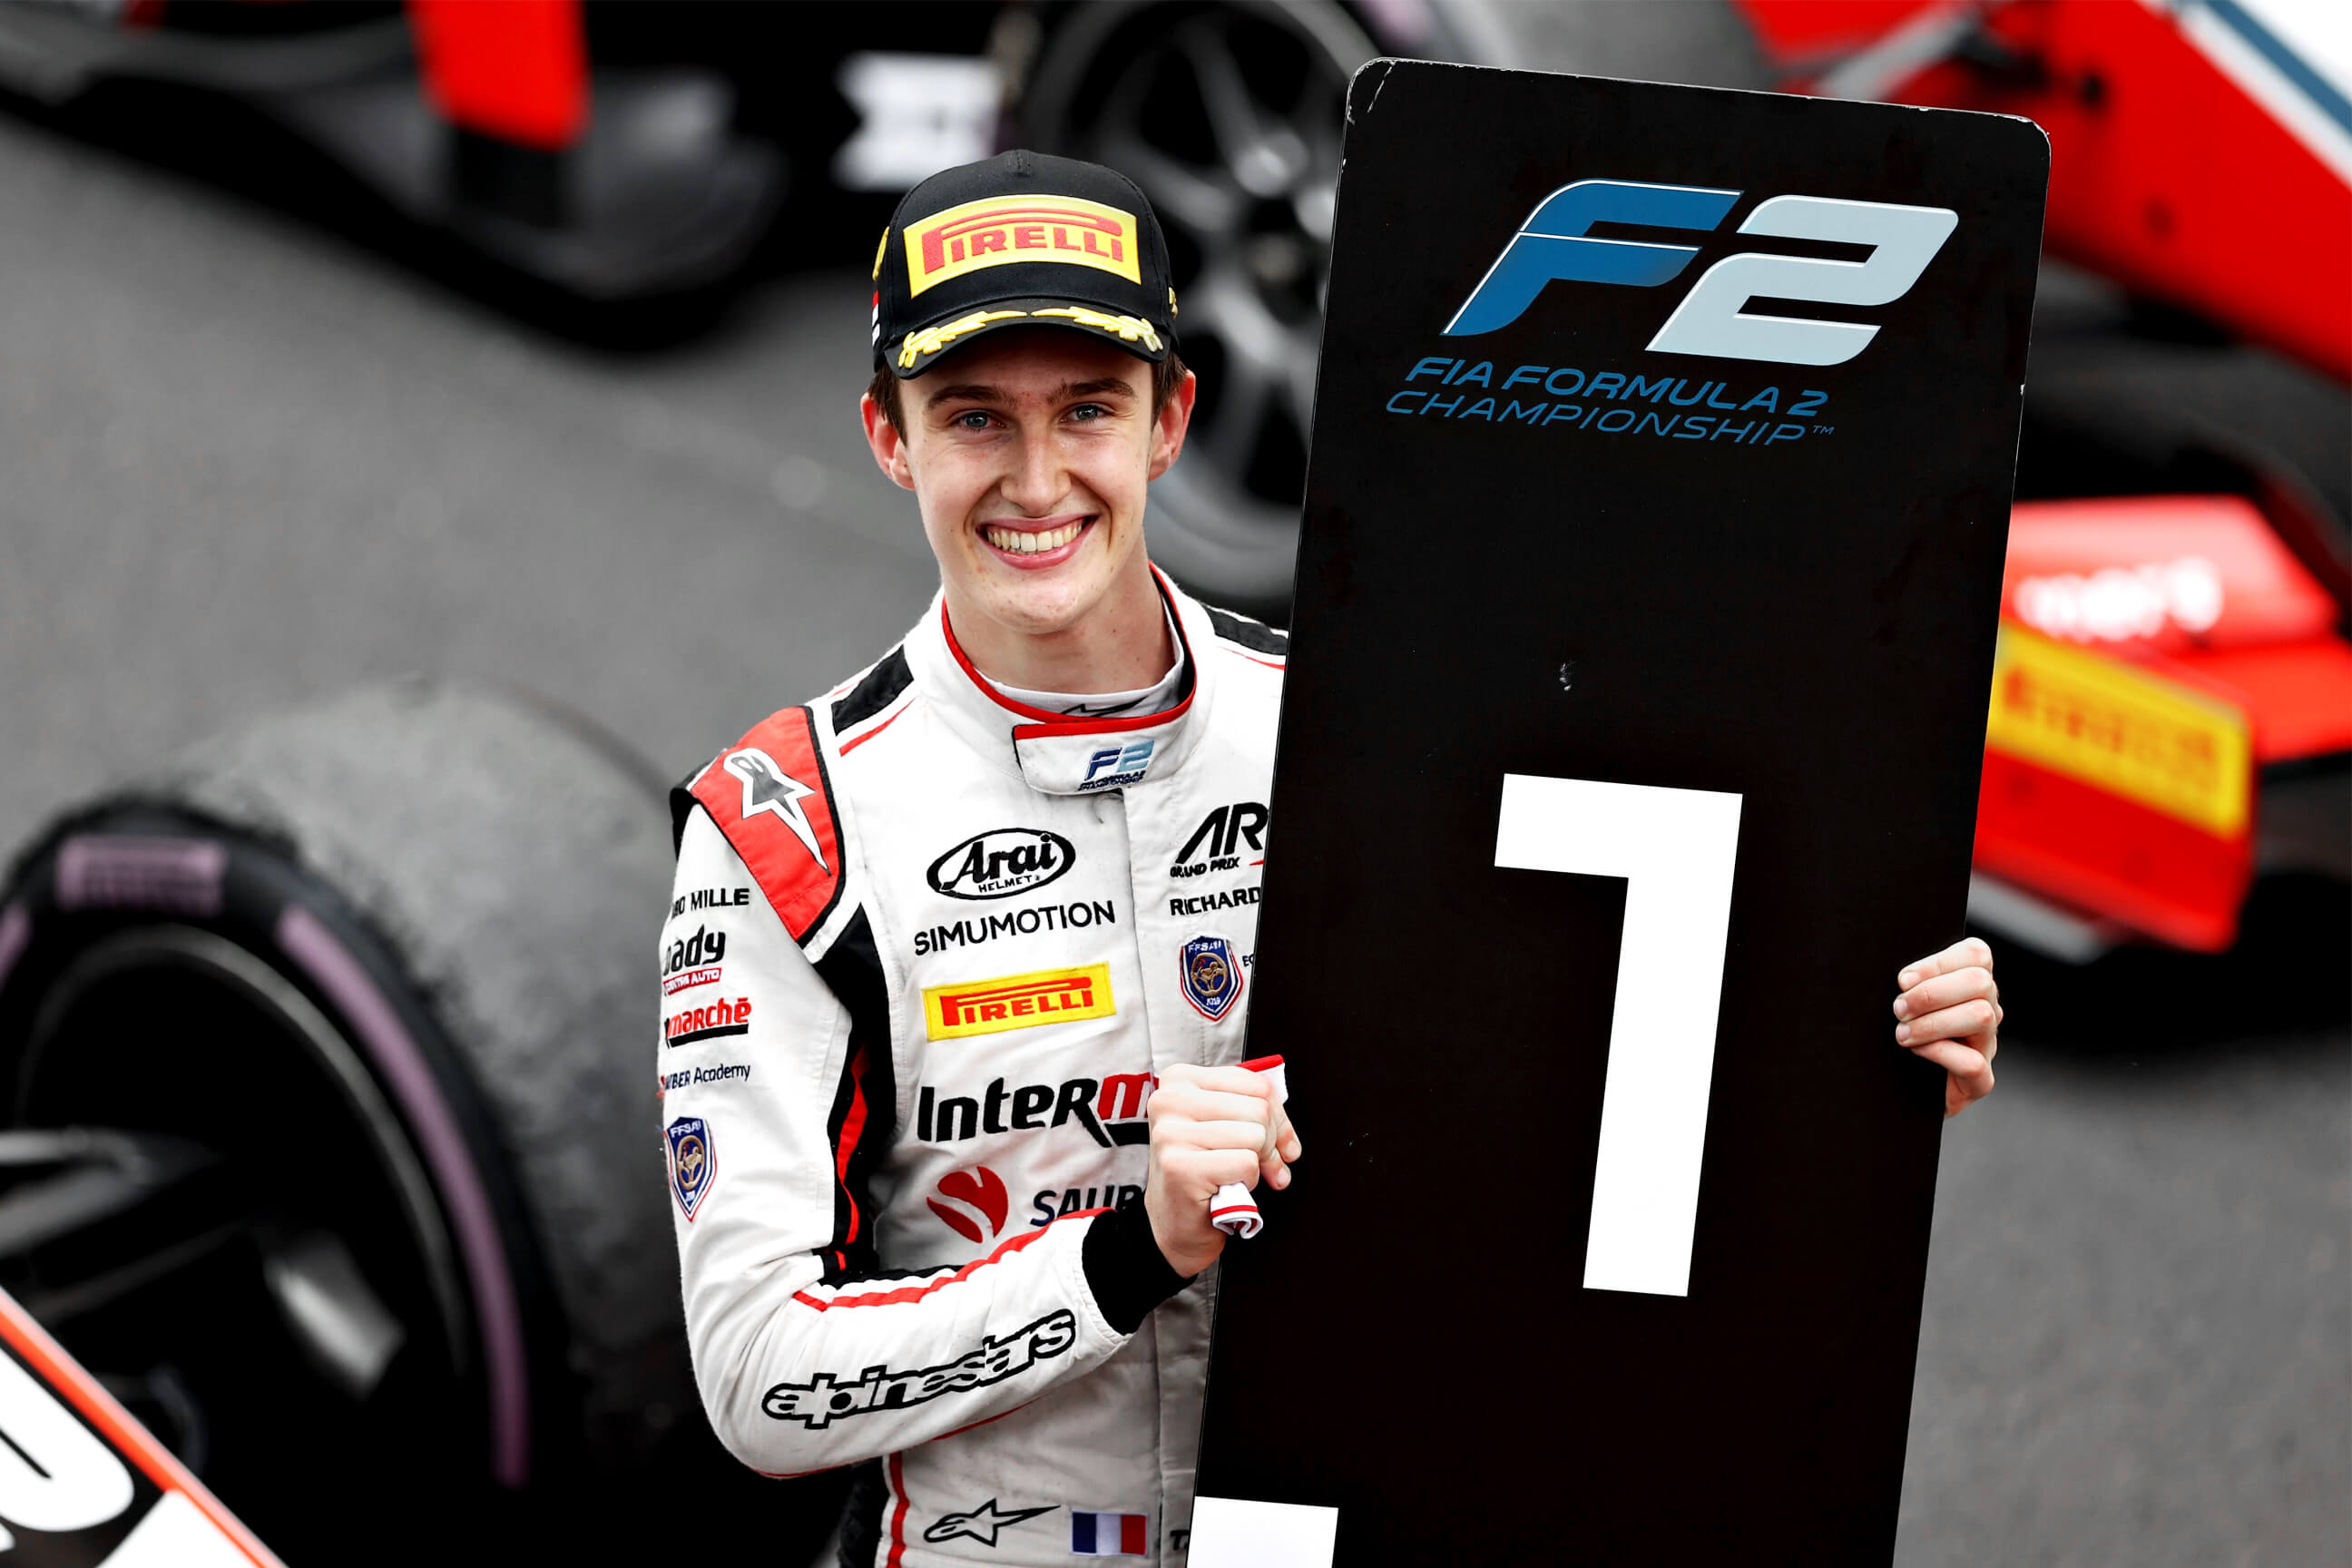 Pole position and victory in Monaco...